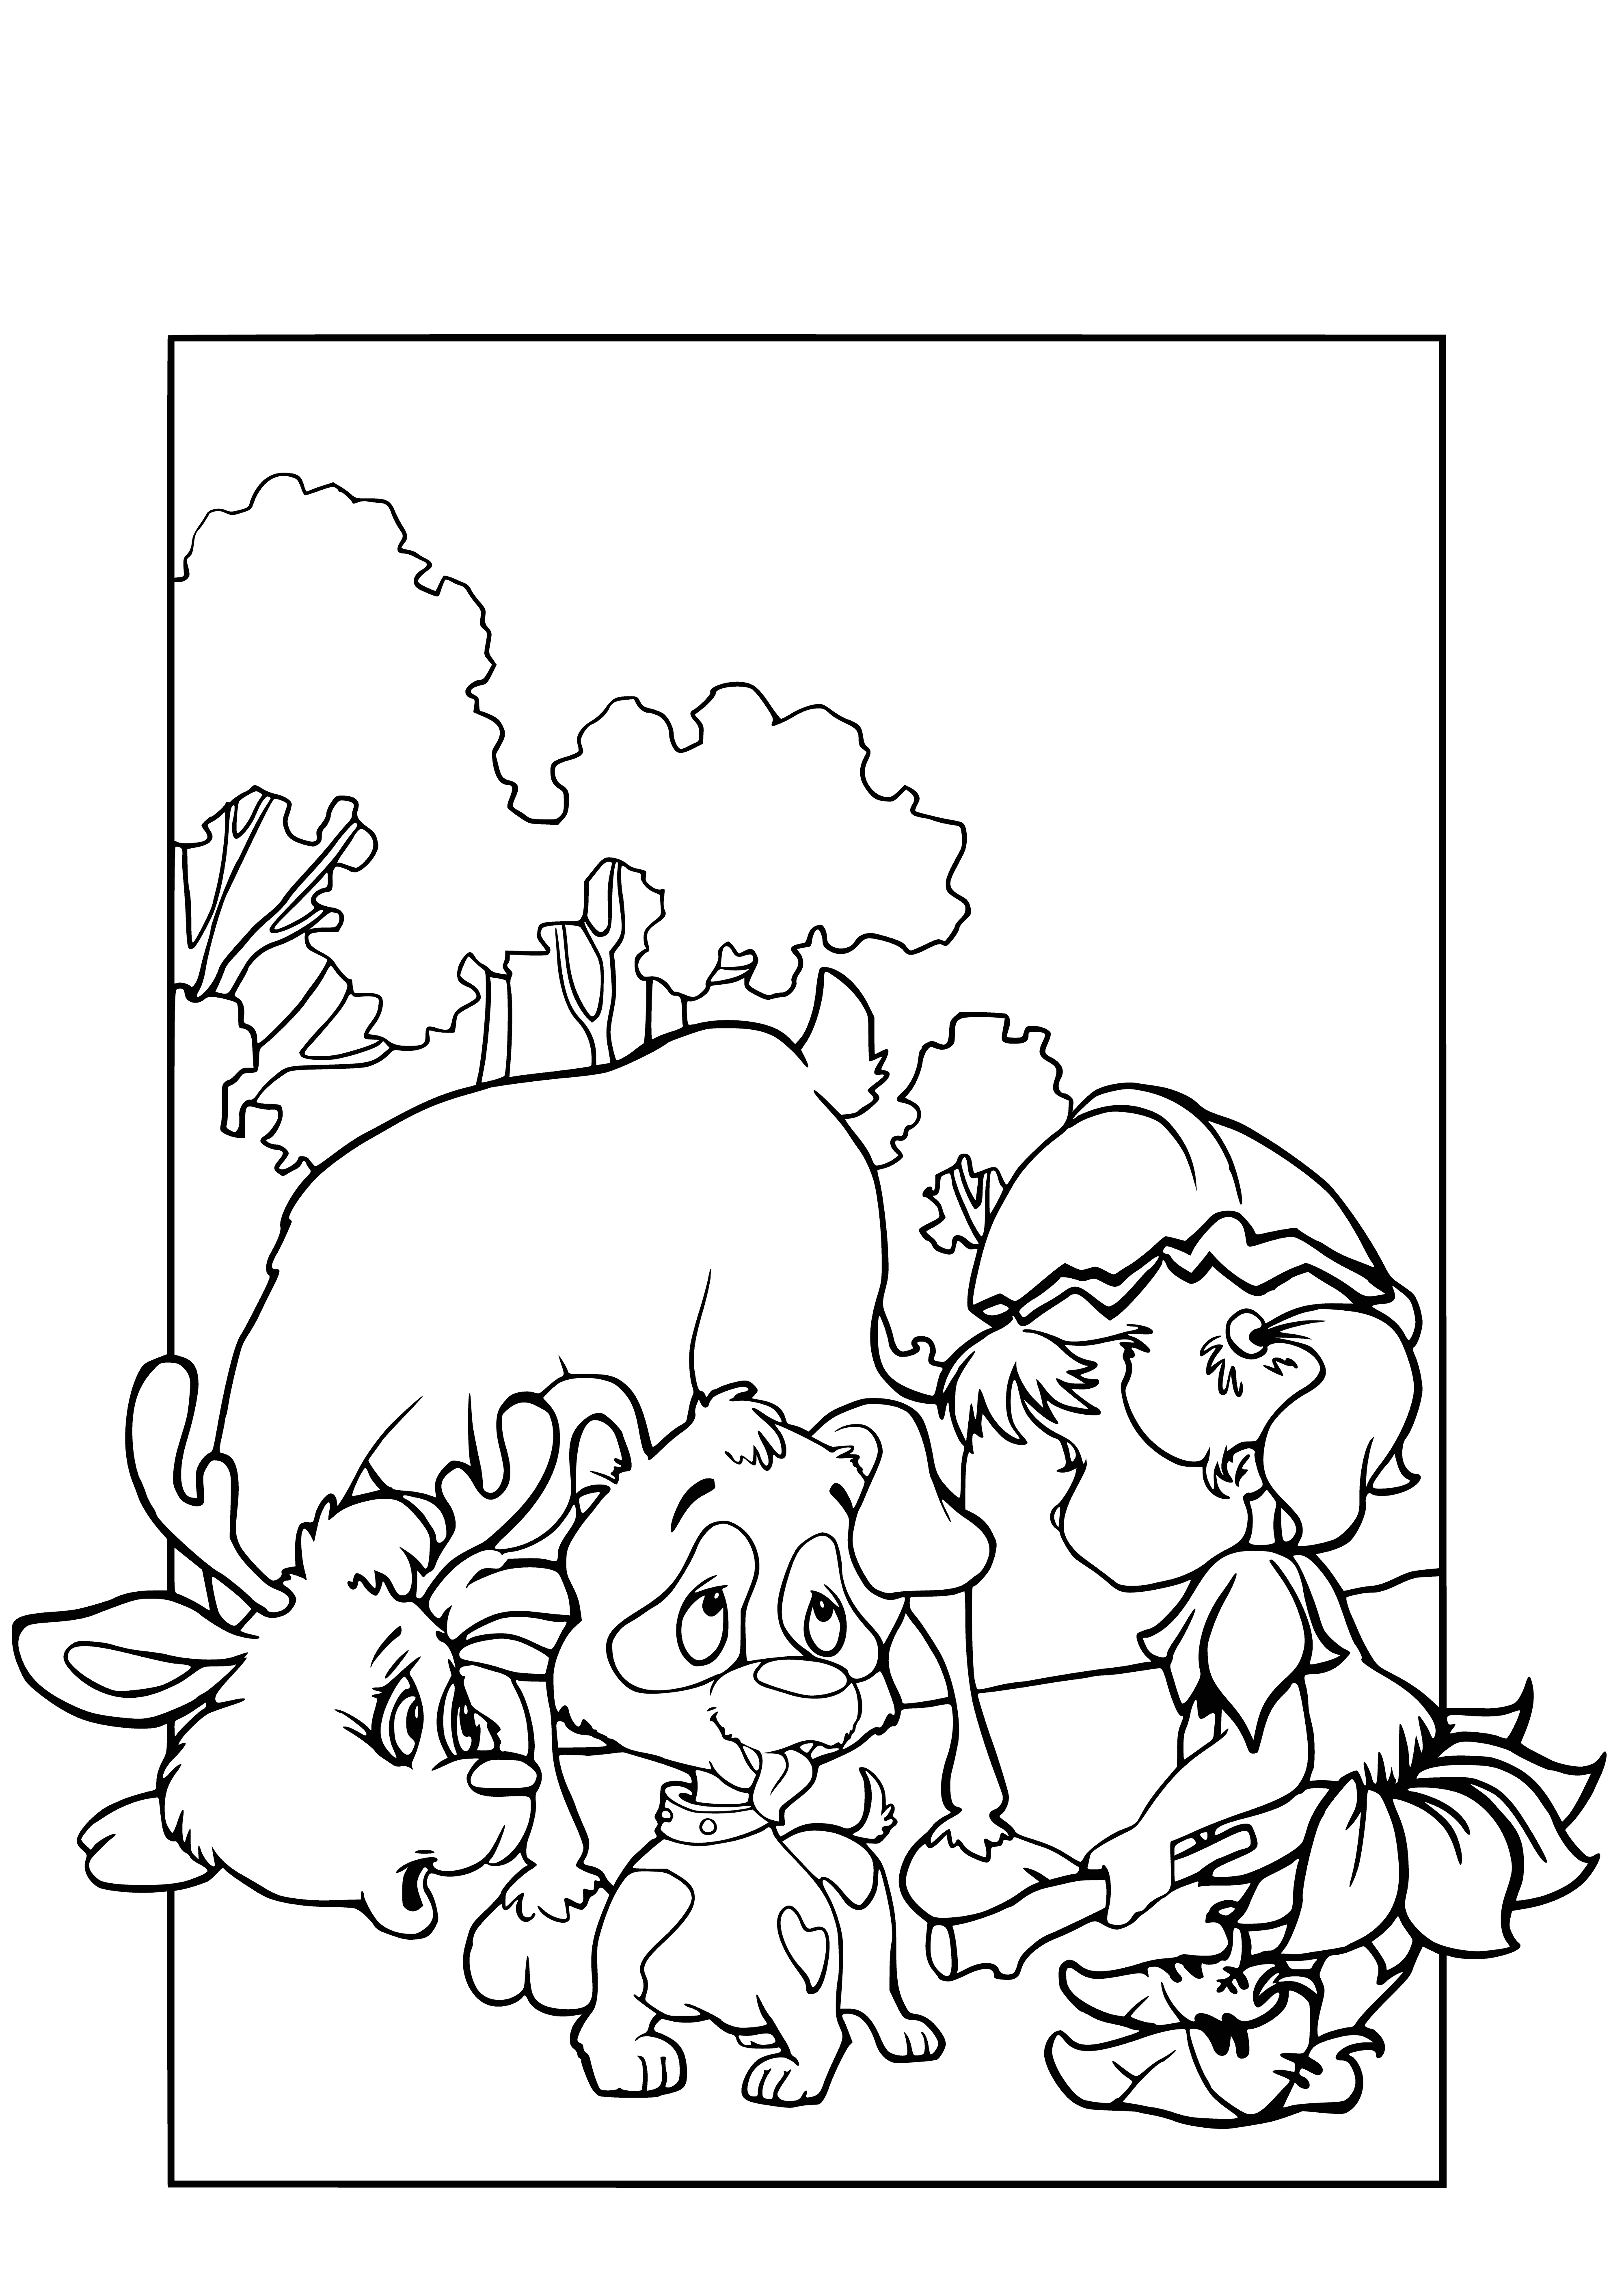 coloring page: Oreshenka and Puppy enjoy a sunny walk in a beautiful meadow of blooming flowers, both happy and content.